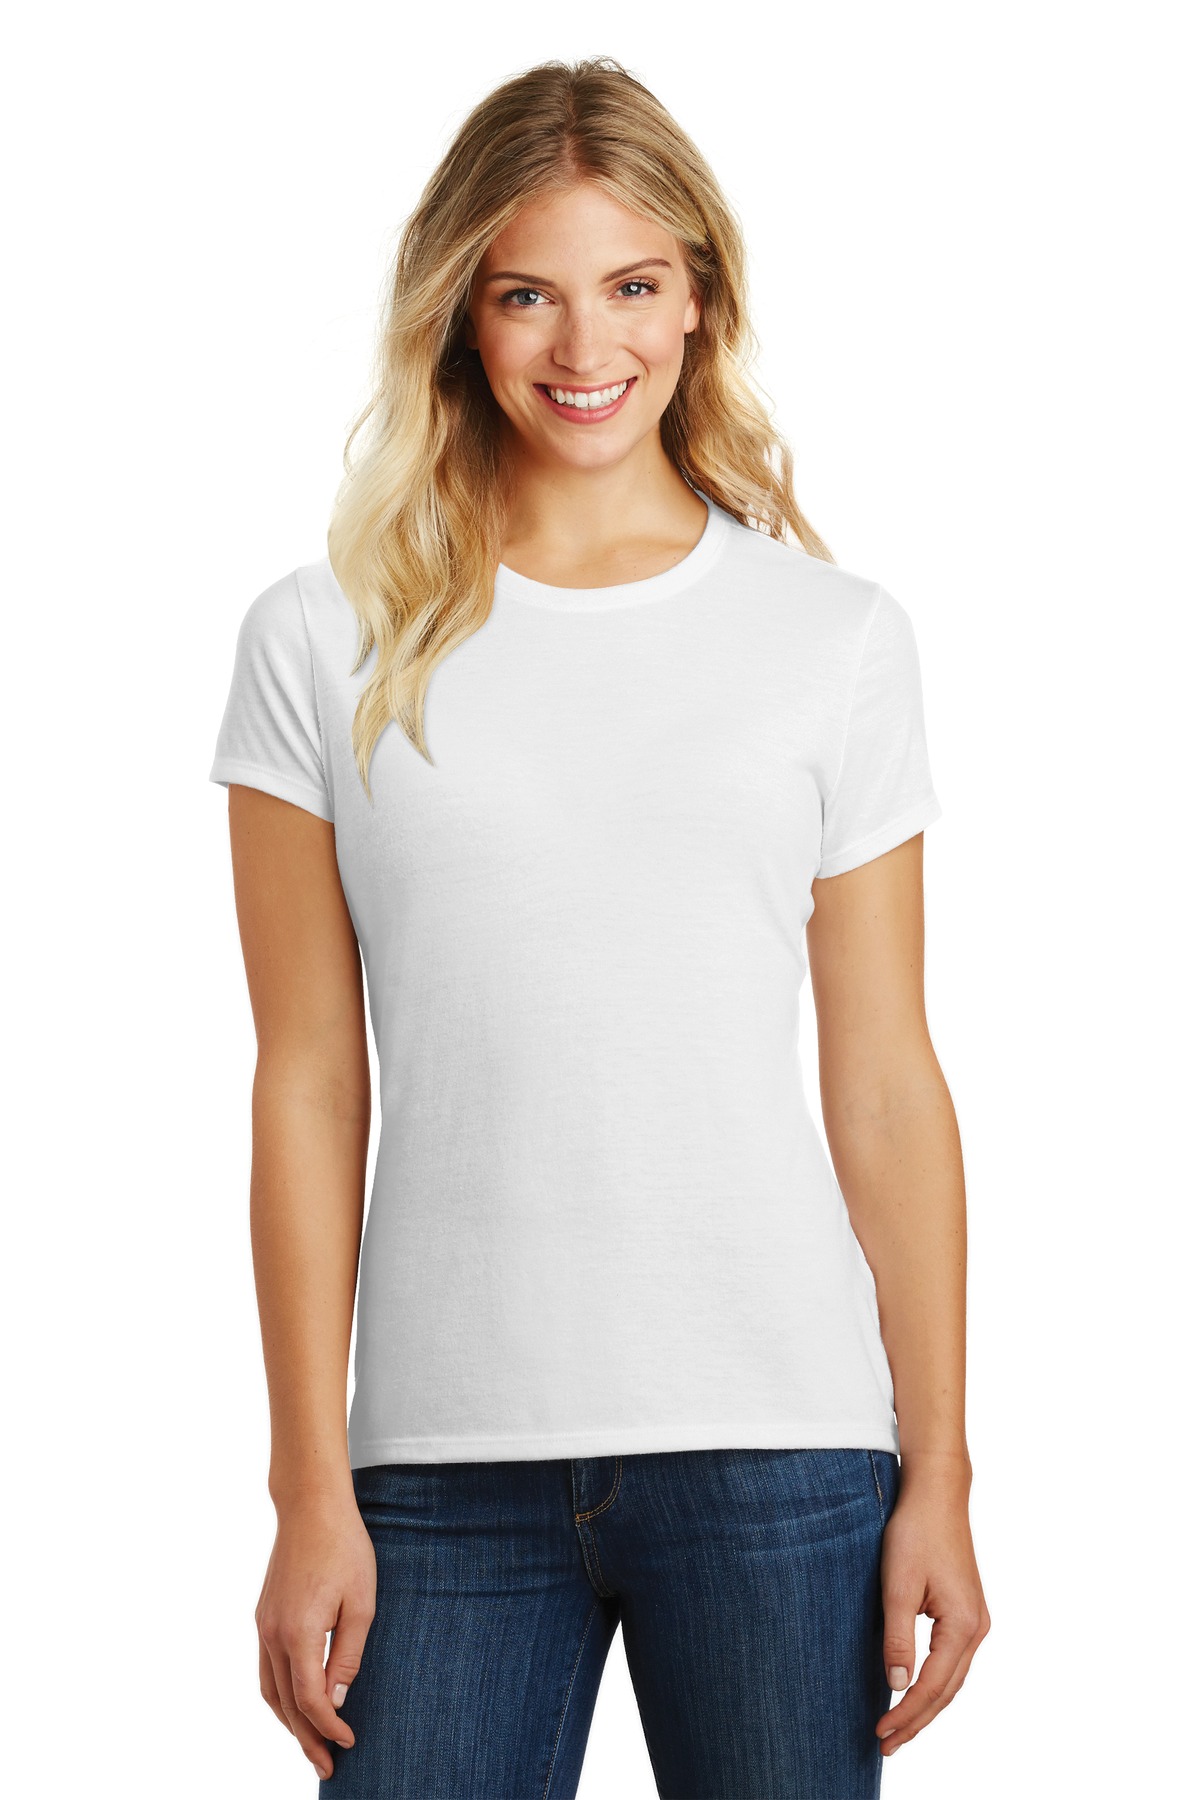 District Ladies Hospitality T-Shirts ® Womens Perfect Blend®Tee.-District